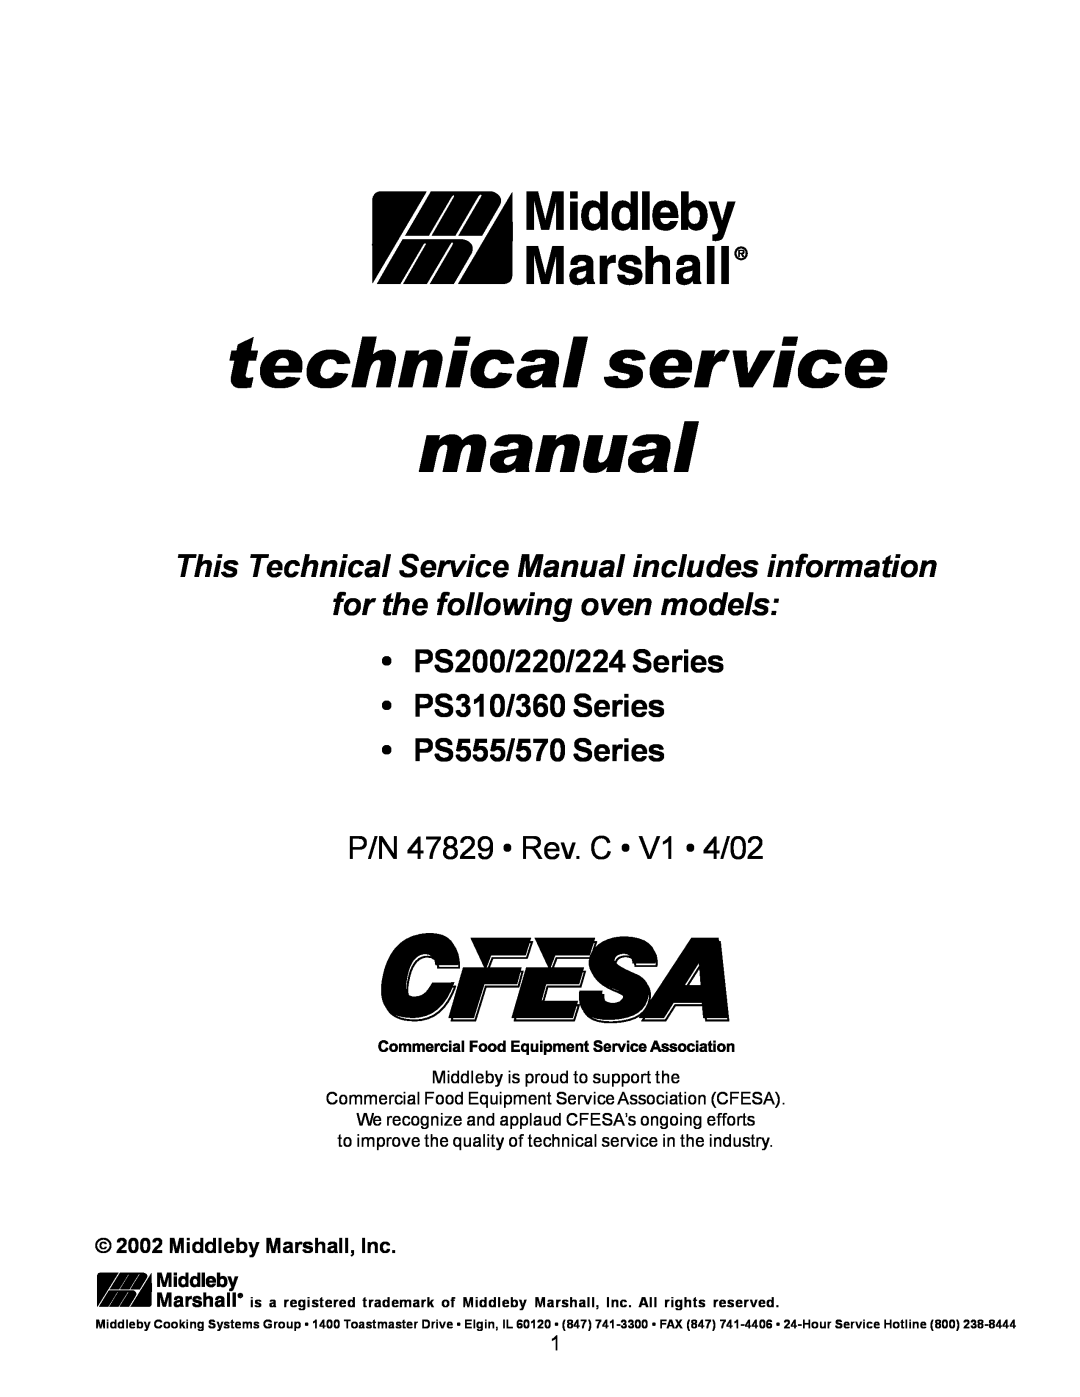 Middleby Marshall PS570, PS360, PS220 PS200/220/224 Series PS310/360 Series PS555/570 Series, Middleby Marshall, Inc 